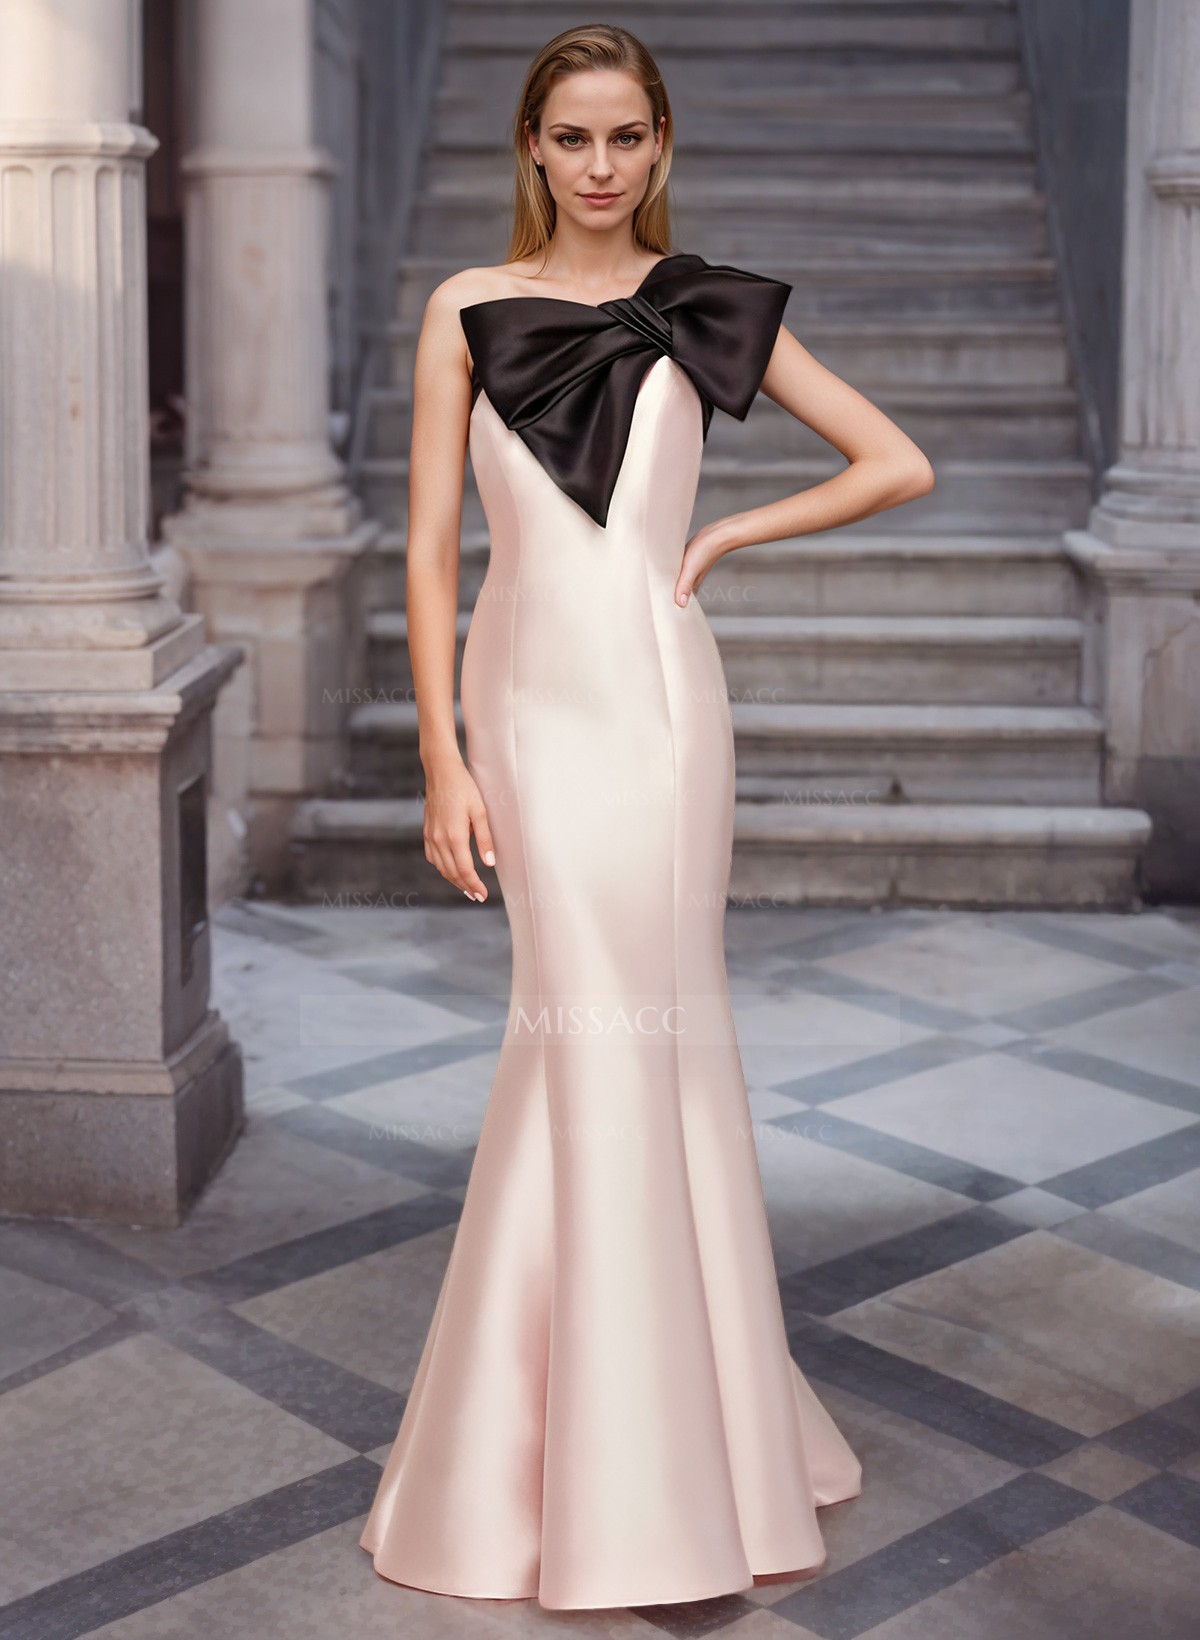 Trumpet/Mermaid One-Shoulder Satin Evening Dresses With Bow